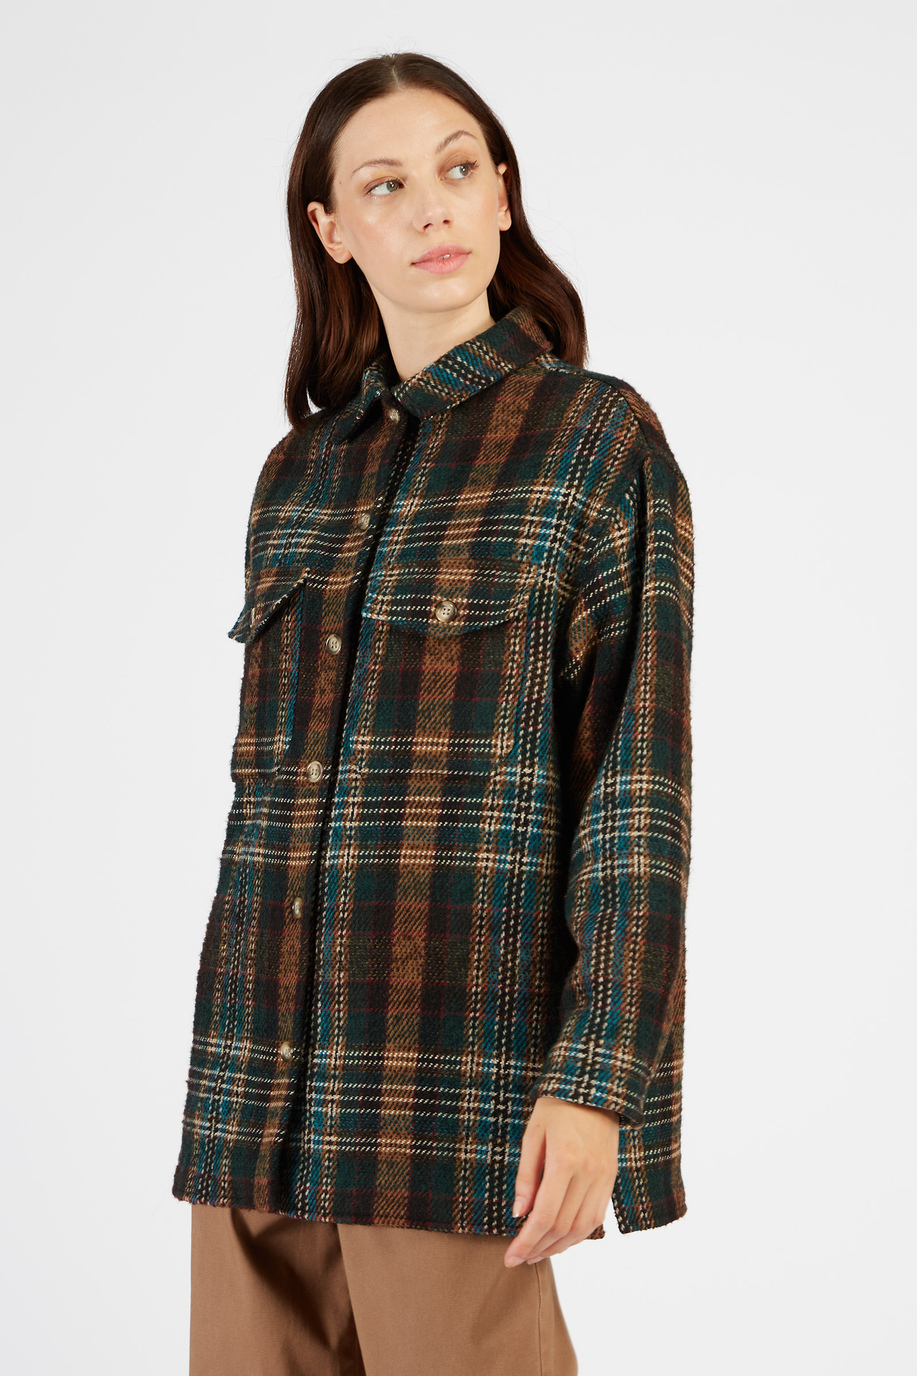 Women’s wool jacket long sleeves checked pattern regular fit - Outerwear | La Martina - Official Online Shop